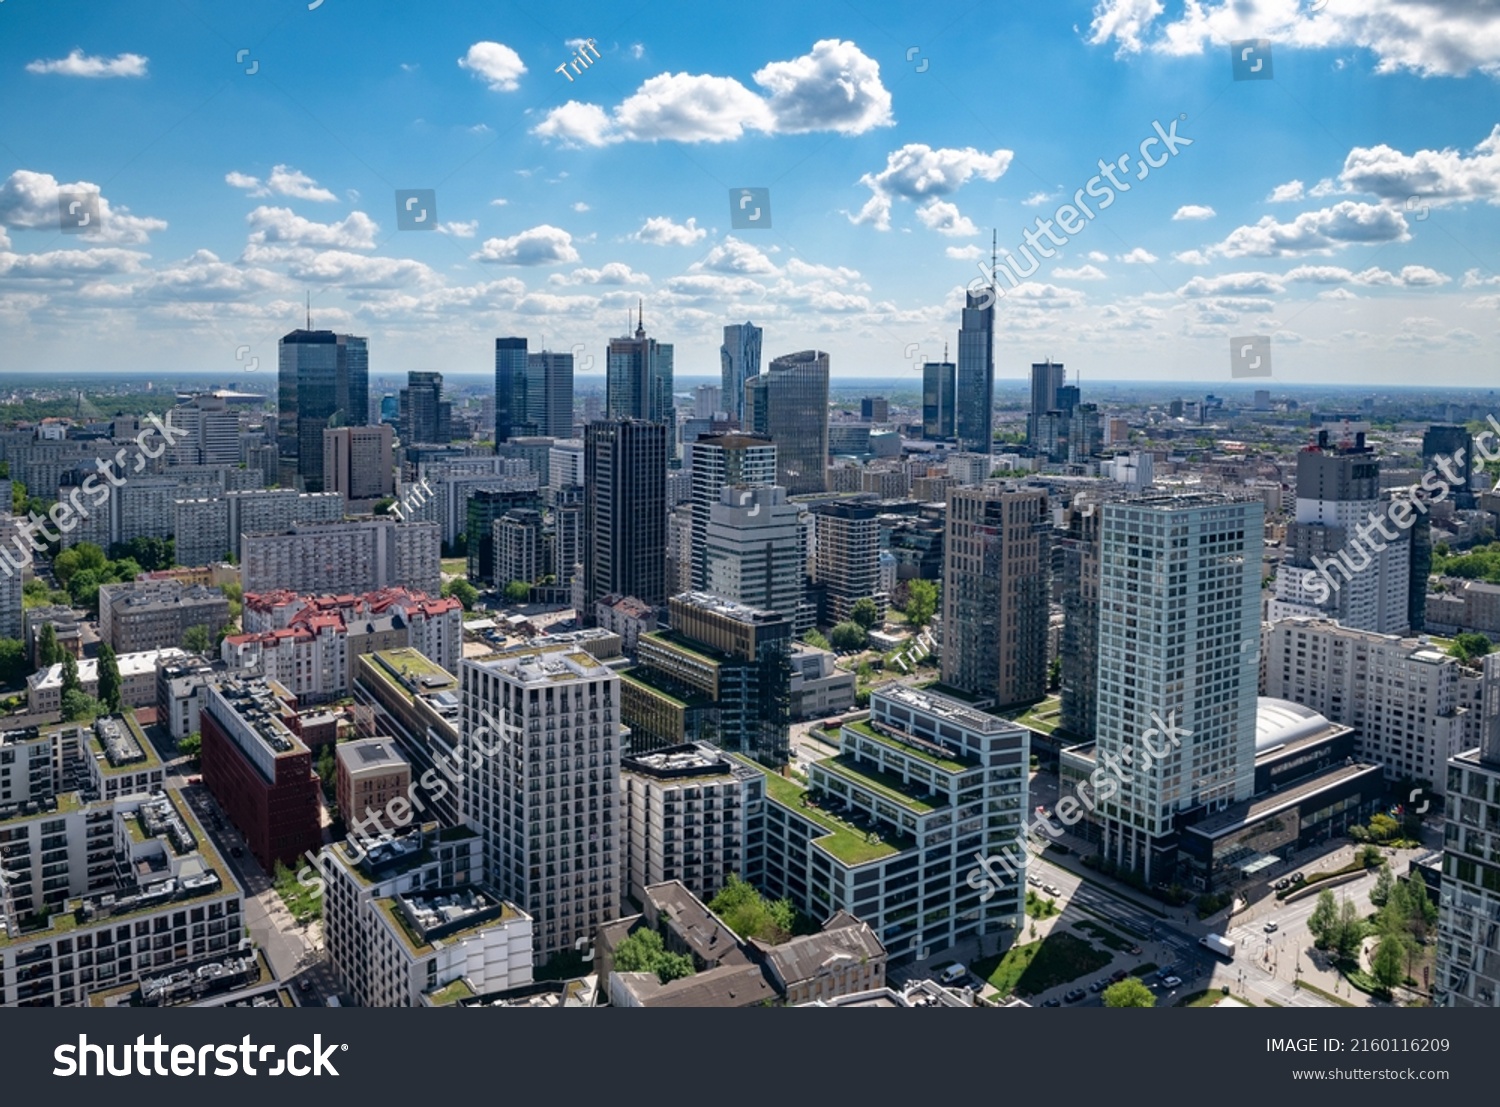 Panoramic. view of modern skyscrapers and business centers in Warsaw. View of the city center from above. Warsaw, Poland. #2160116209